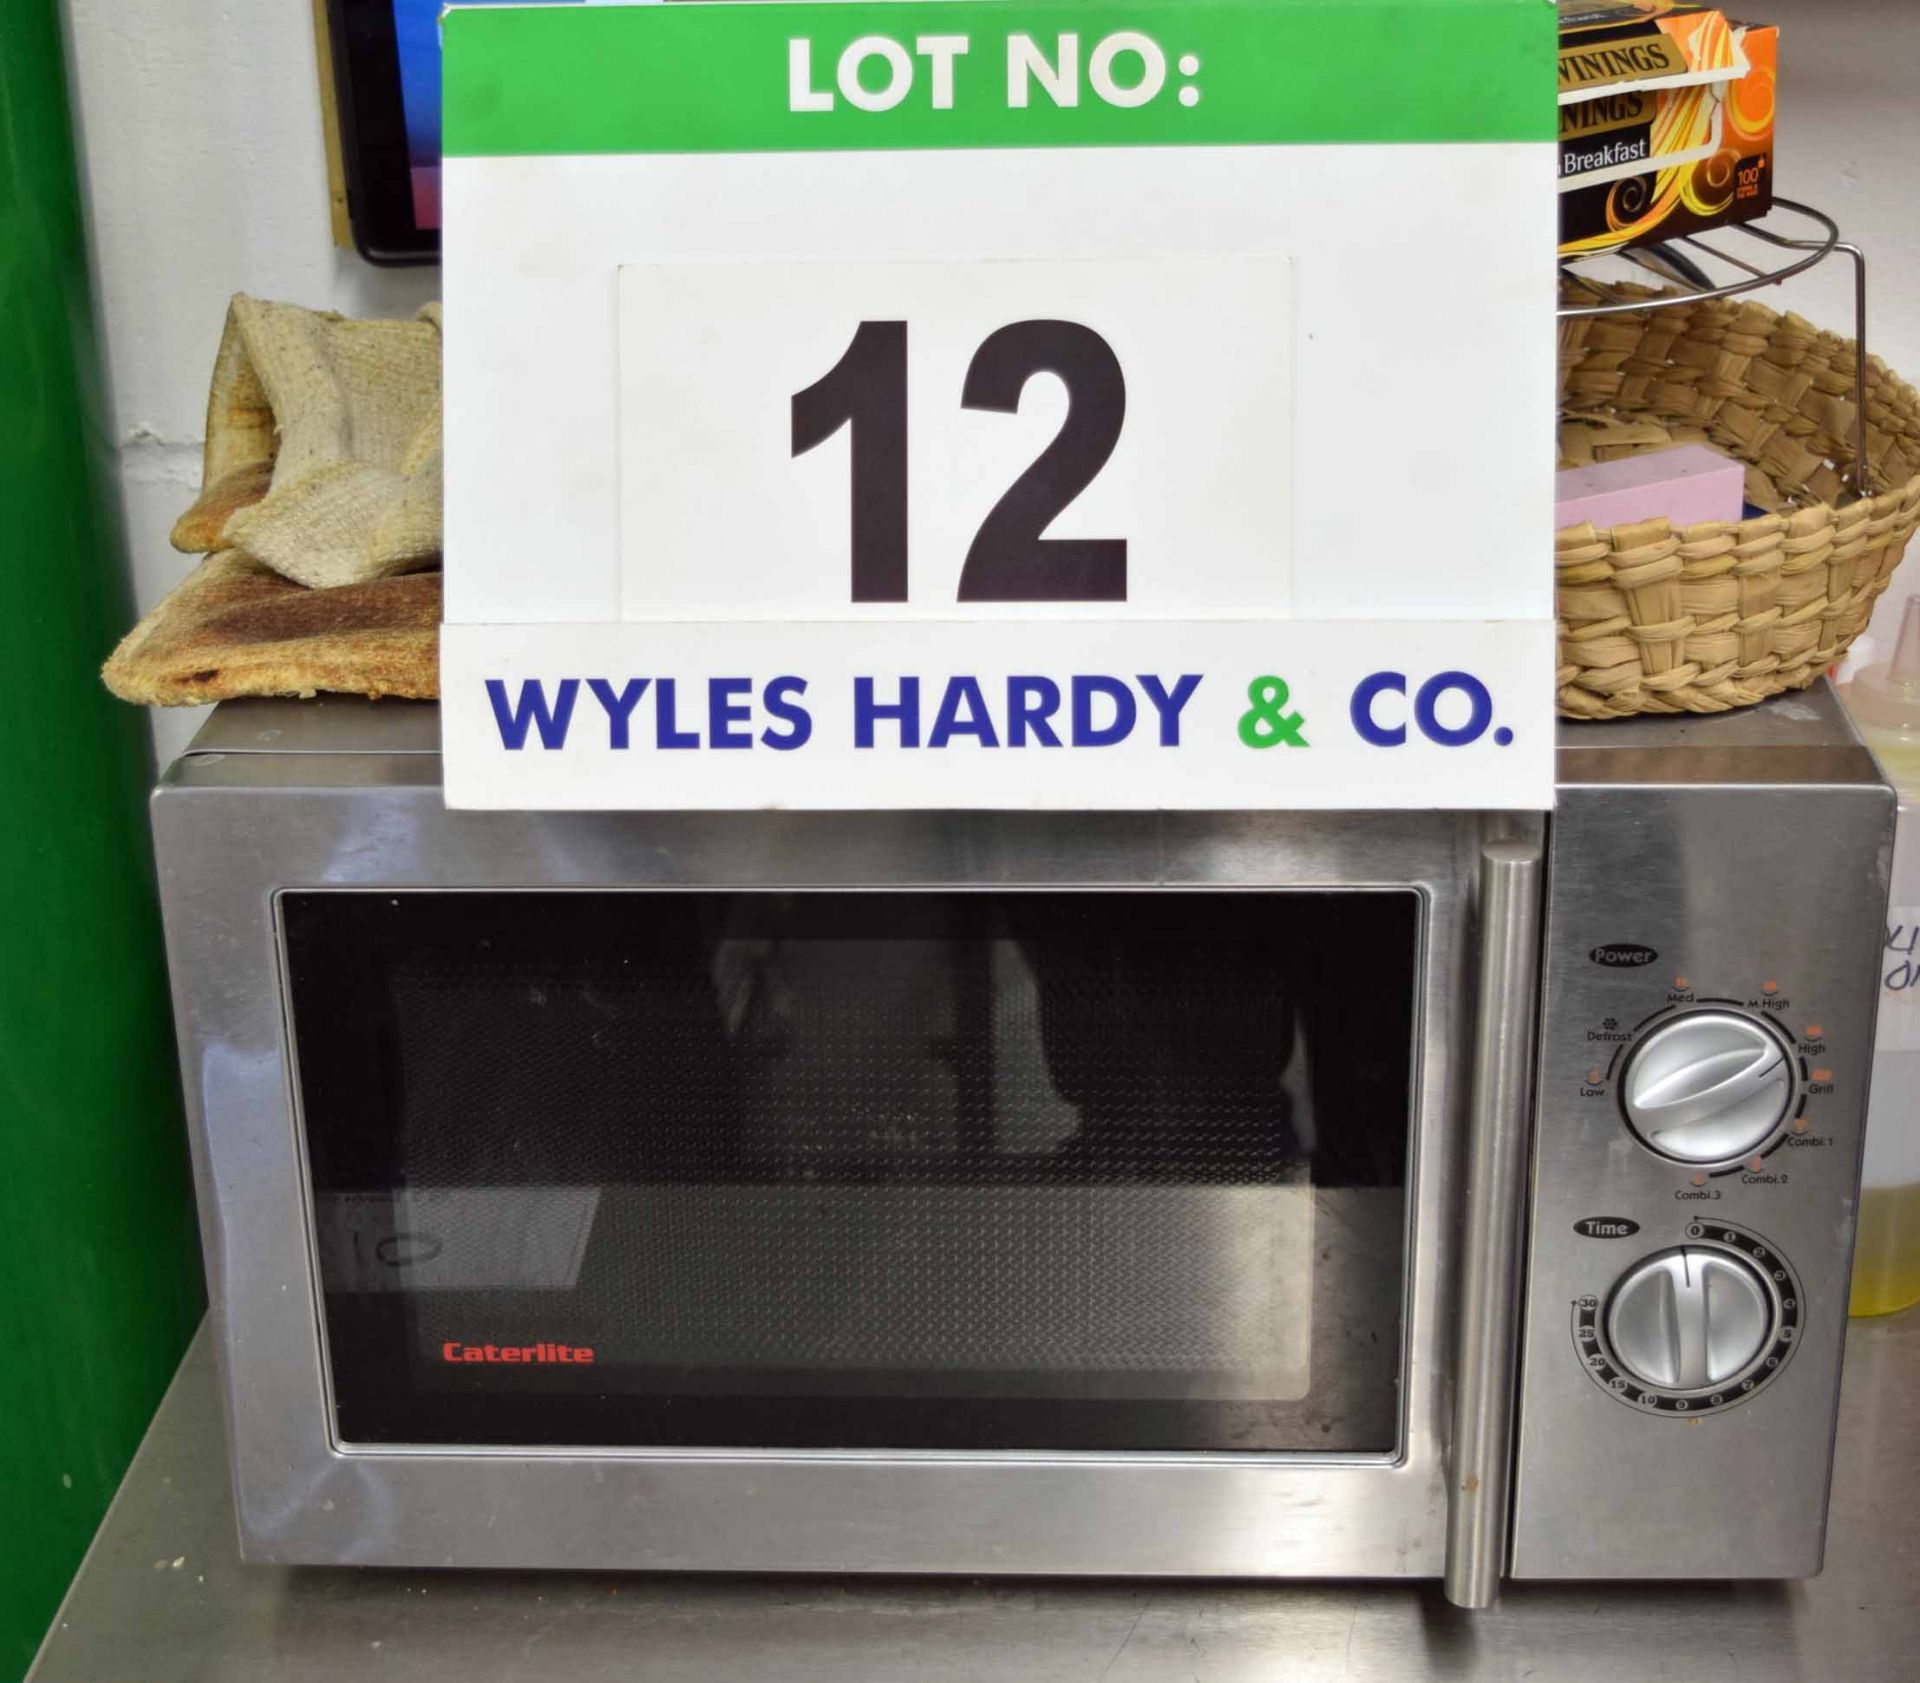 A CATERLITE Stainless Steel Microwave Oven